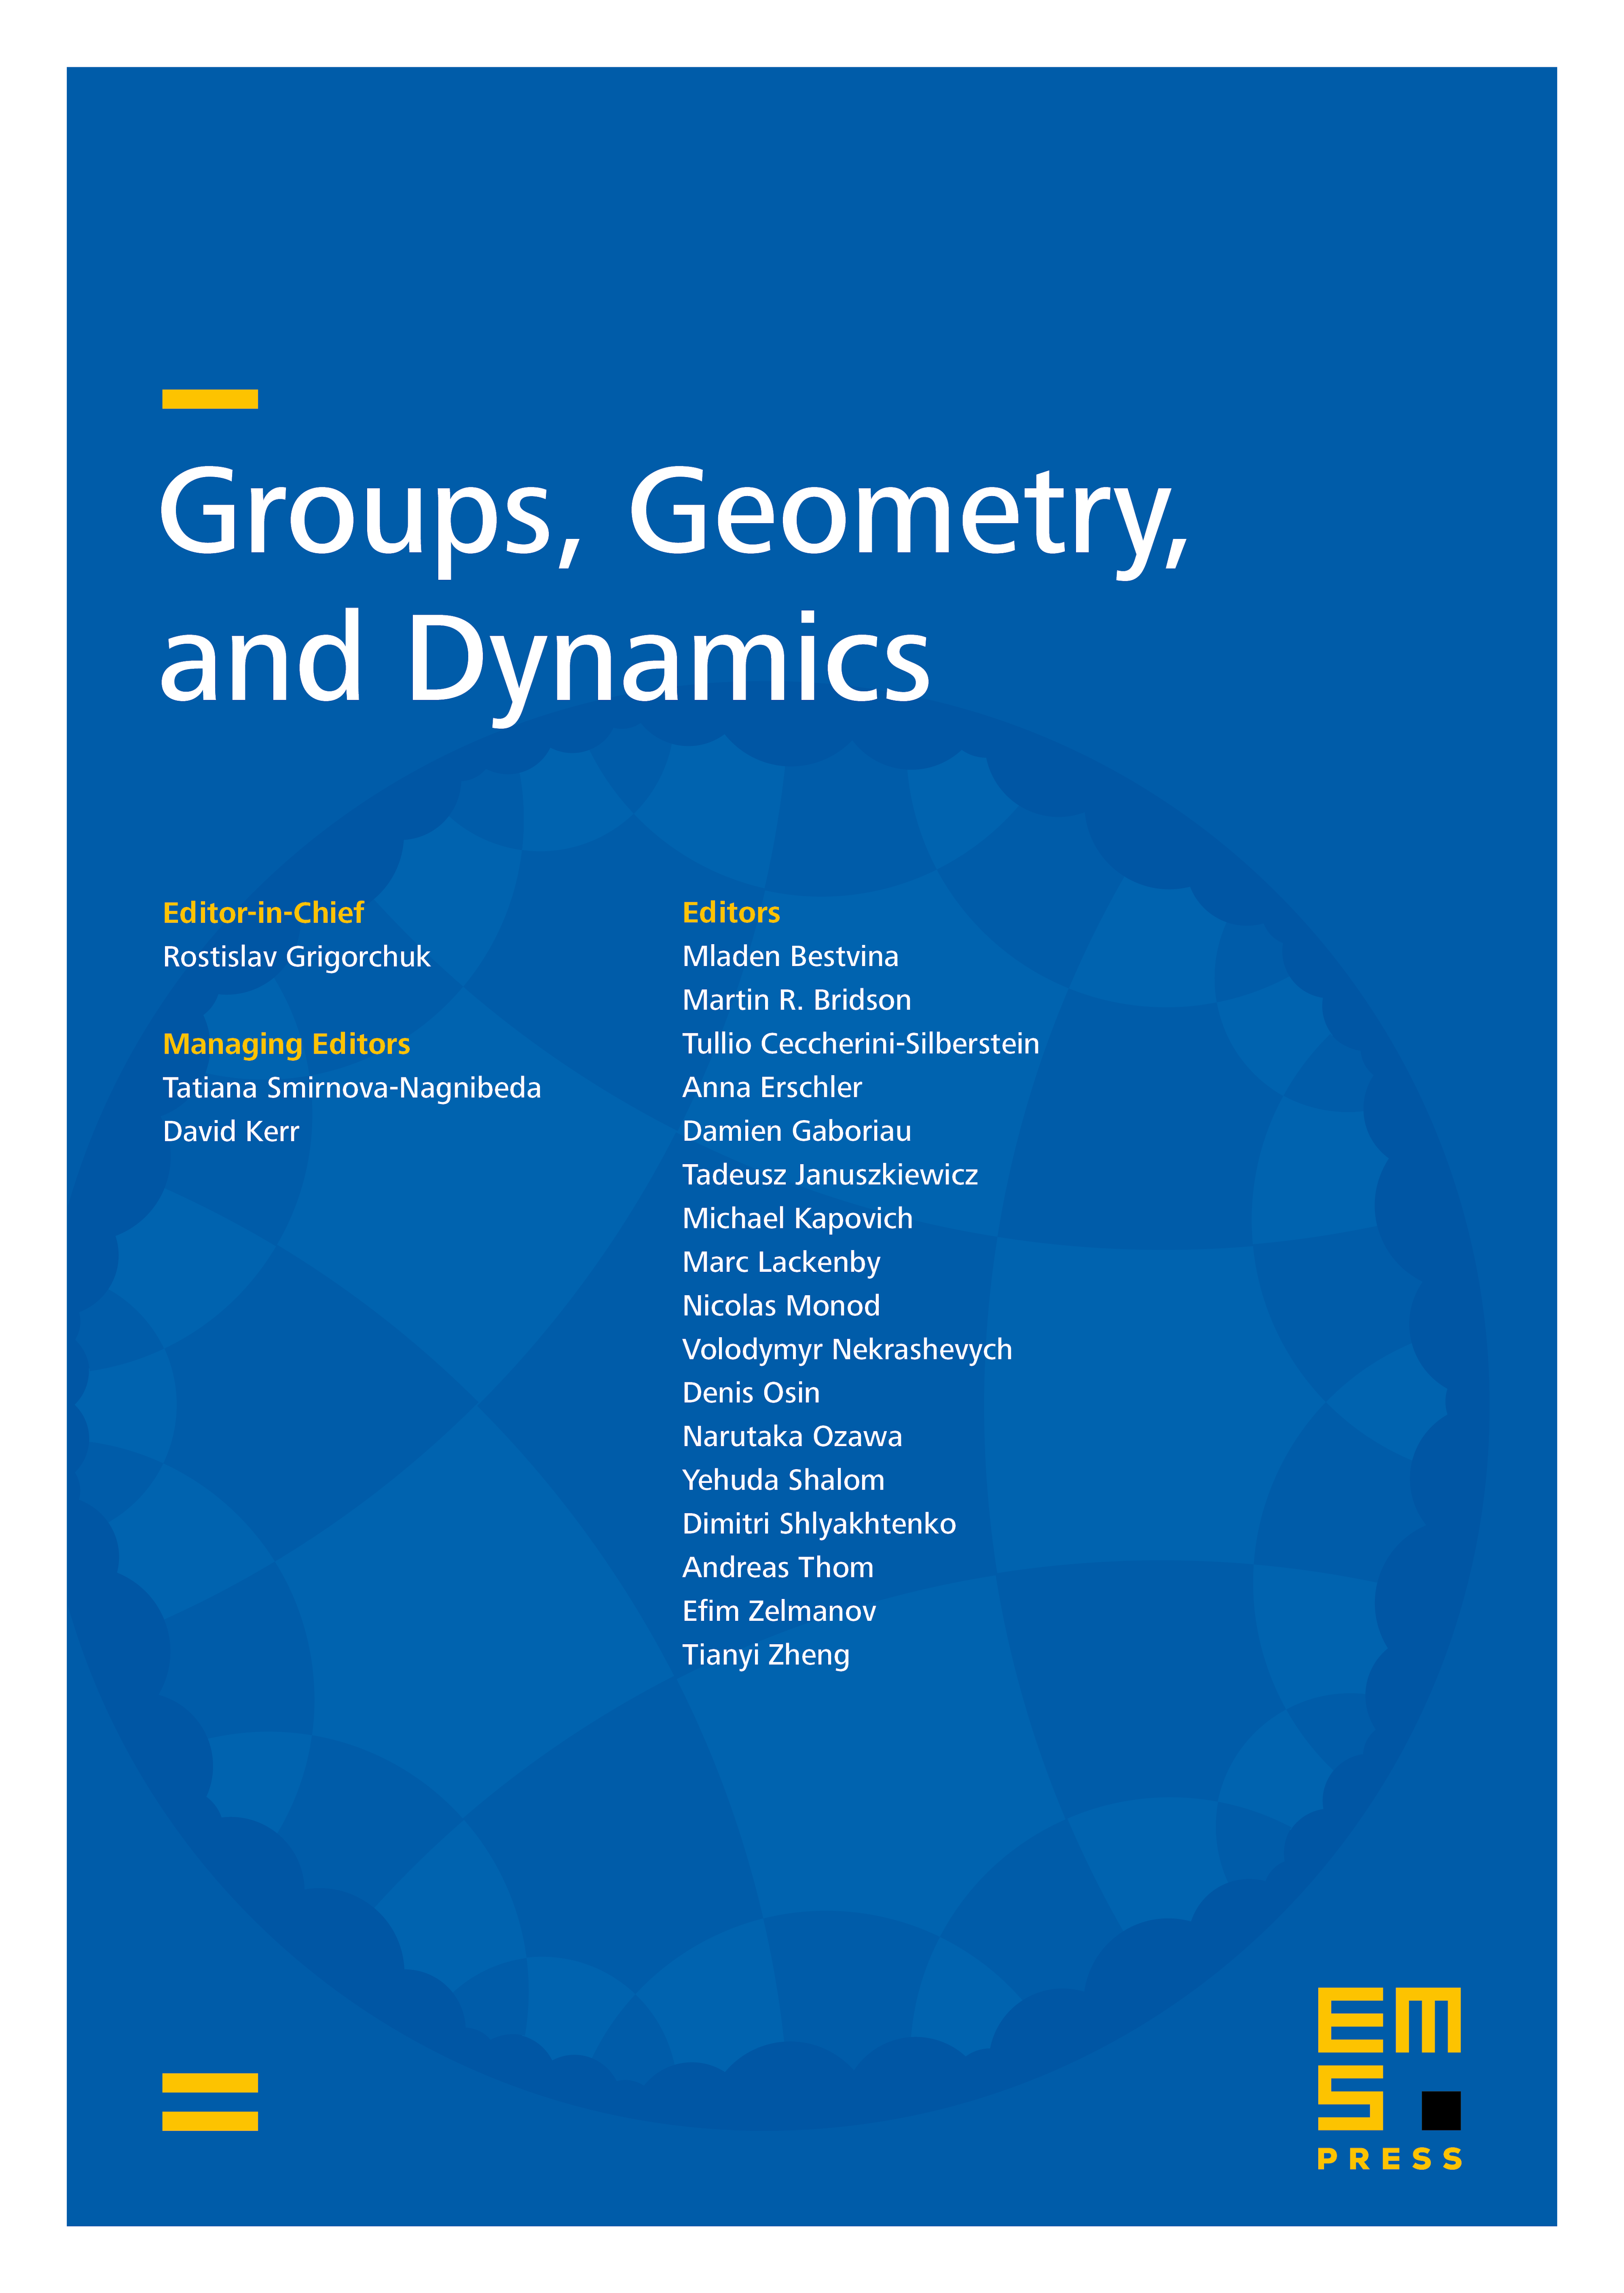 Rigidity for equivalence relations on homogeneous spaces cover